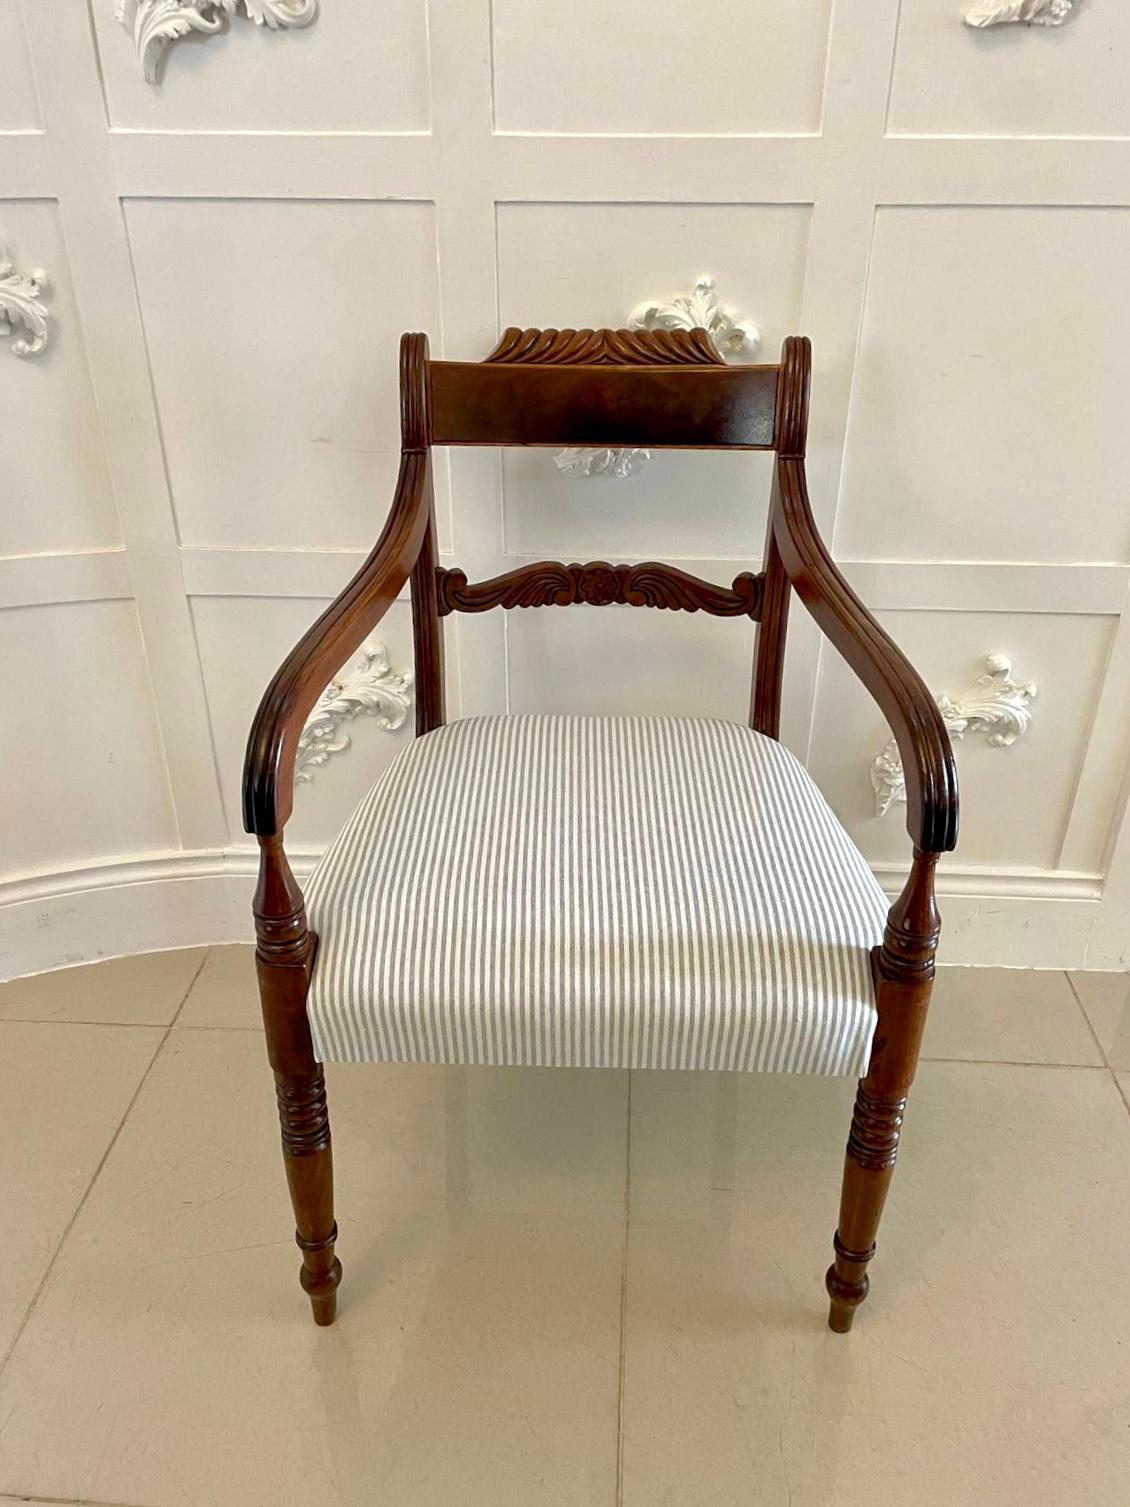 Antique Regency quality carved mahogany desk chair having a figured mahogany carved top rail, quality carved splat to the centre, shaped reeded open arms with turned supports, newly reupholstered seat in a quality fabric standing on elegant turned